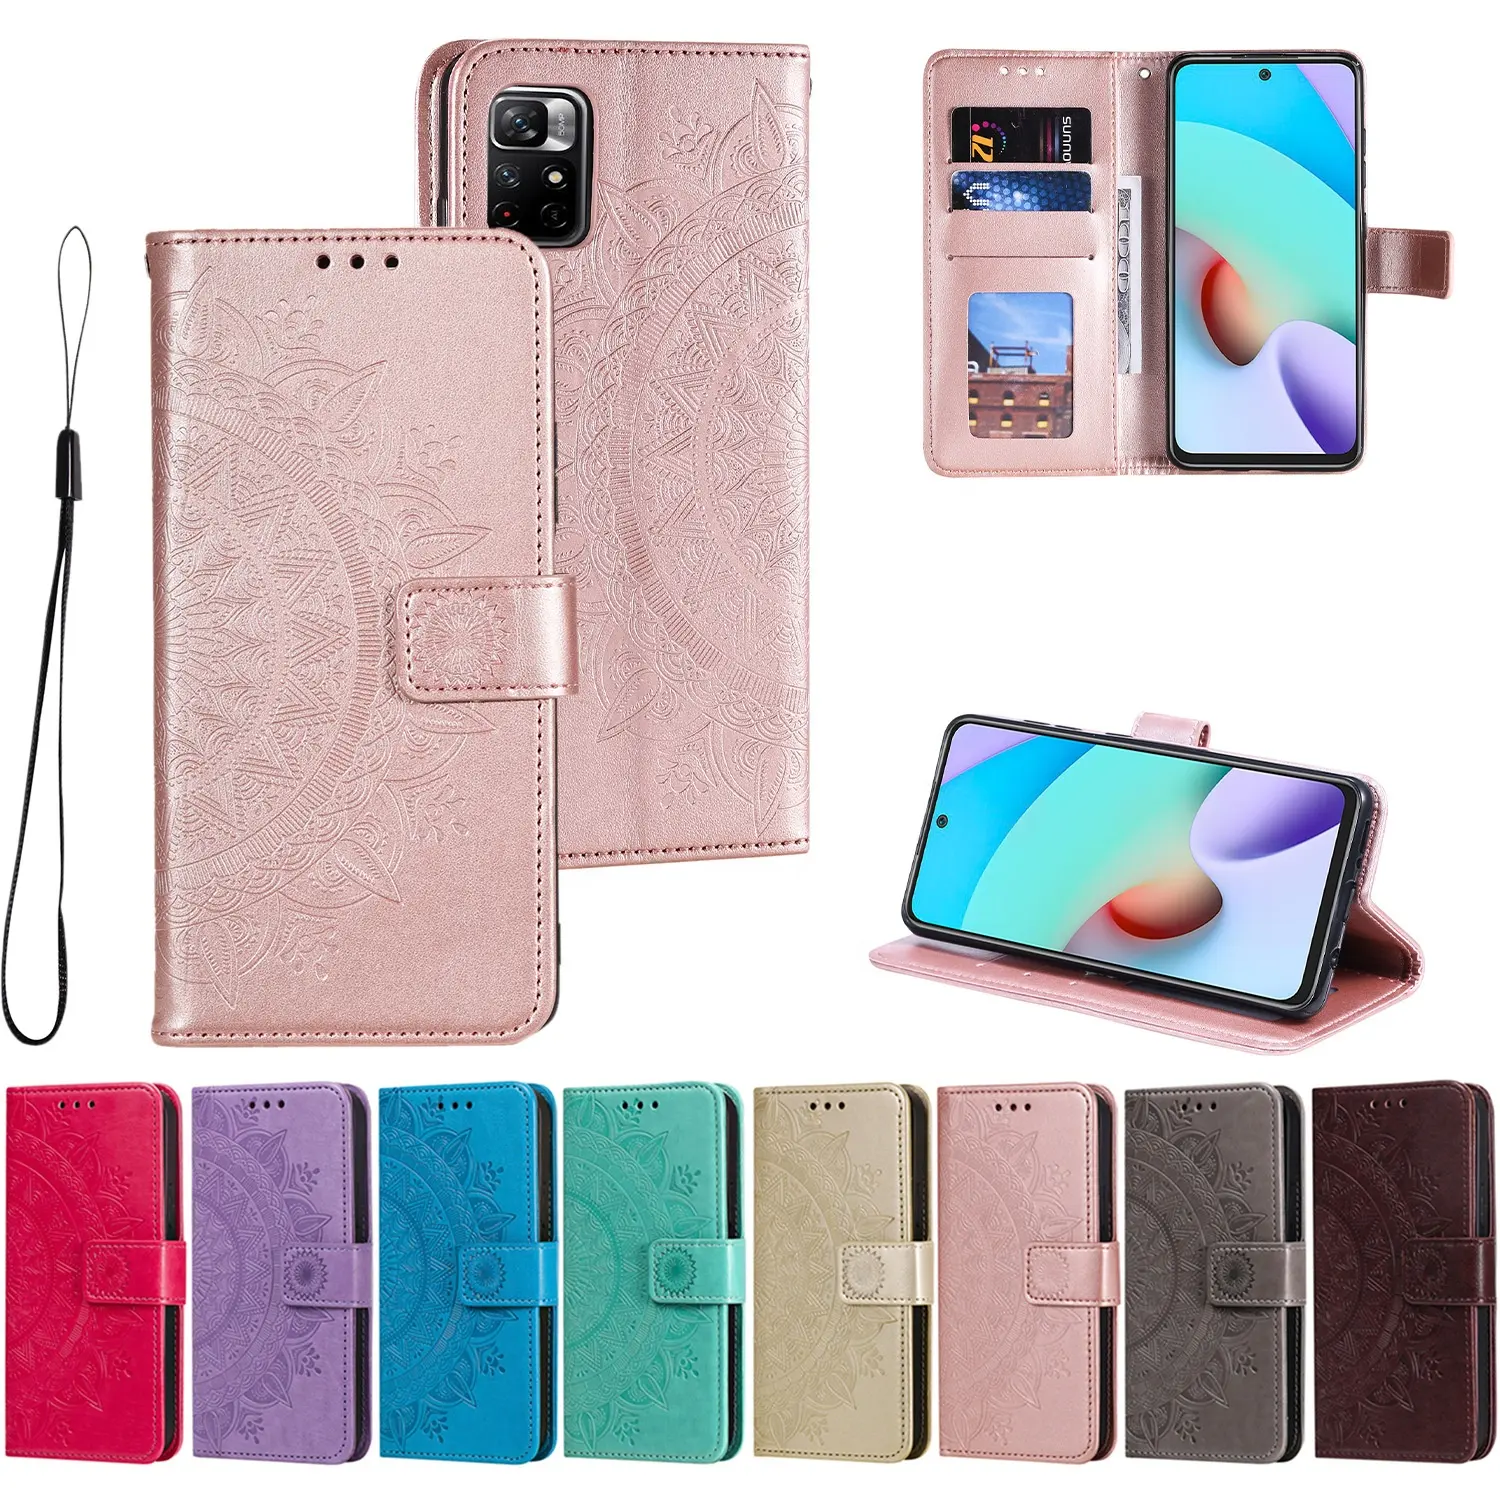 Embossing Leather PU Wallet Case Card Slots Flip Cover Case For Samsung Galaxy A 52 A72 S21 S20 Ultra NOTE 20 ultra